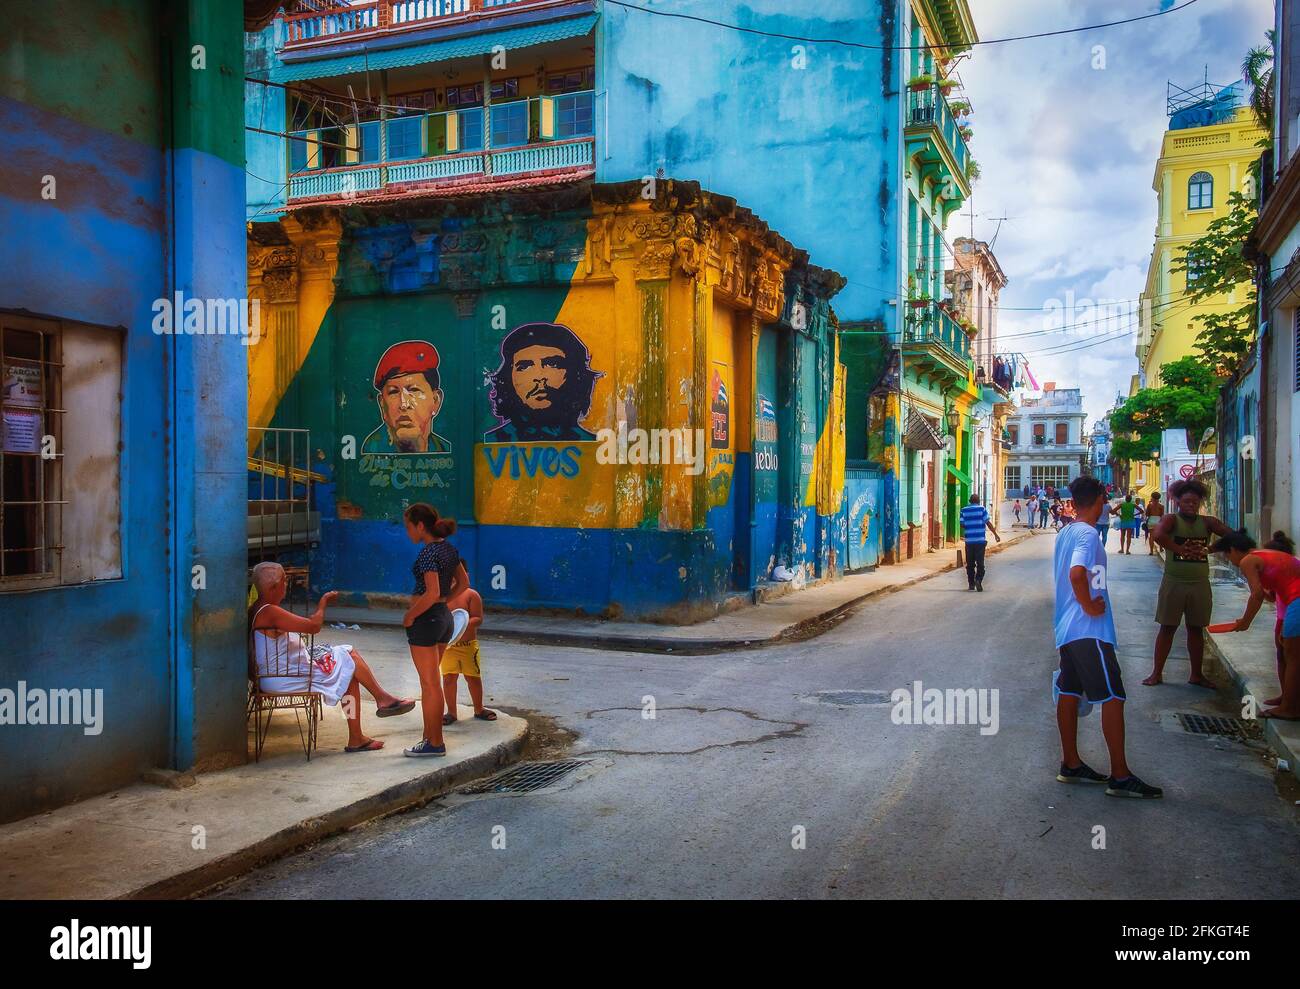 Havana, Cuba, July 2019, urban scene by a mural of the portrait of Hugo Chavez and Che Guevara in the oldest part of the city Stock Photo